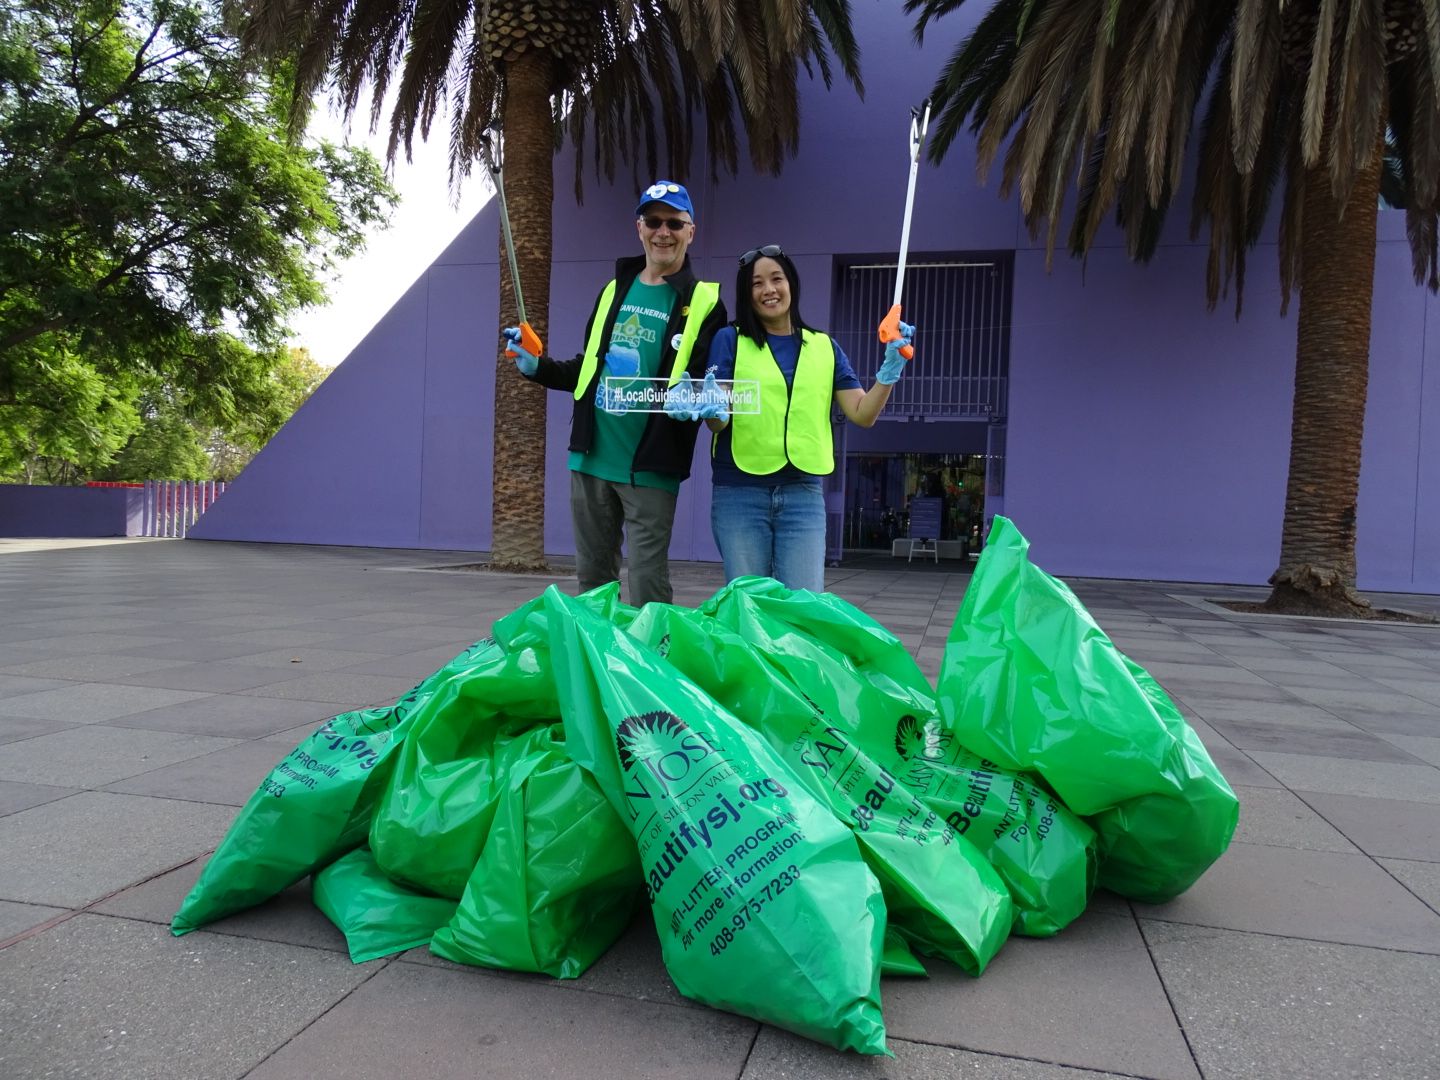 Caption: Local Guides @KarenVChin and @ermest  behind the bags of plastic collected at the Children's Discovery Museum of San Jose